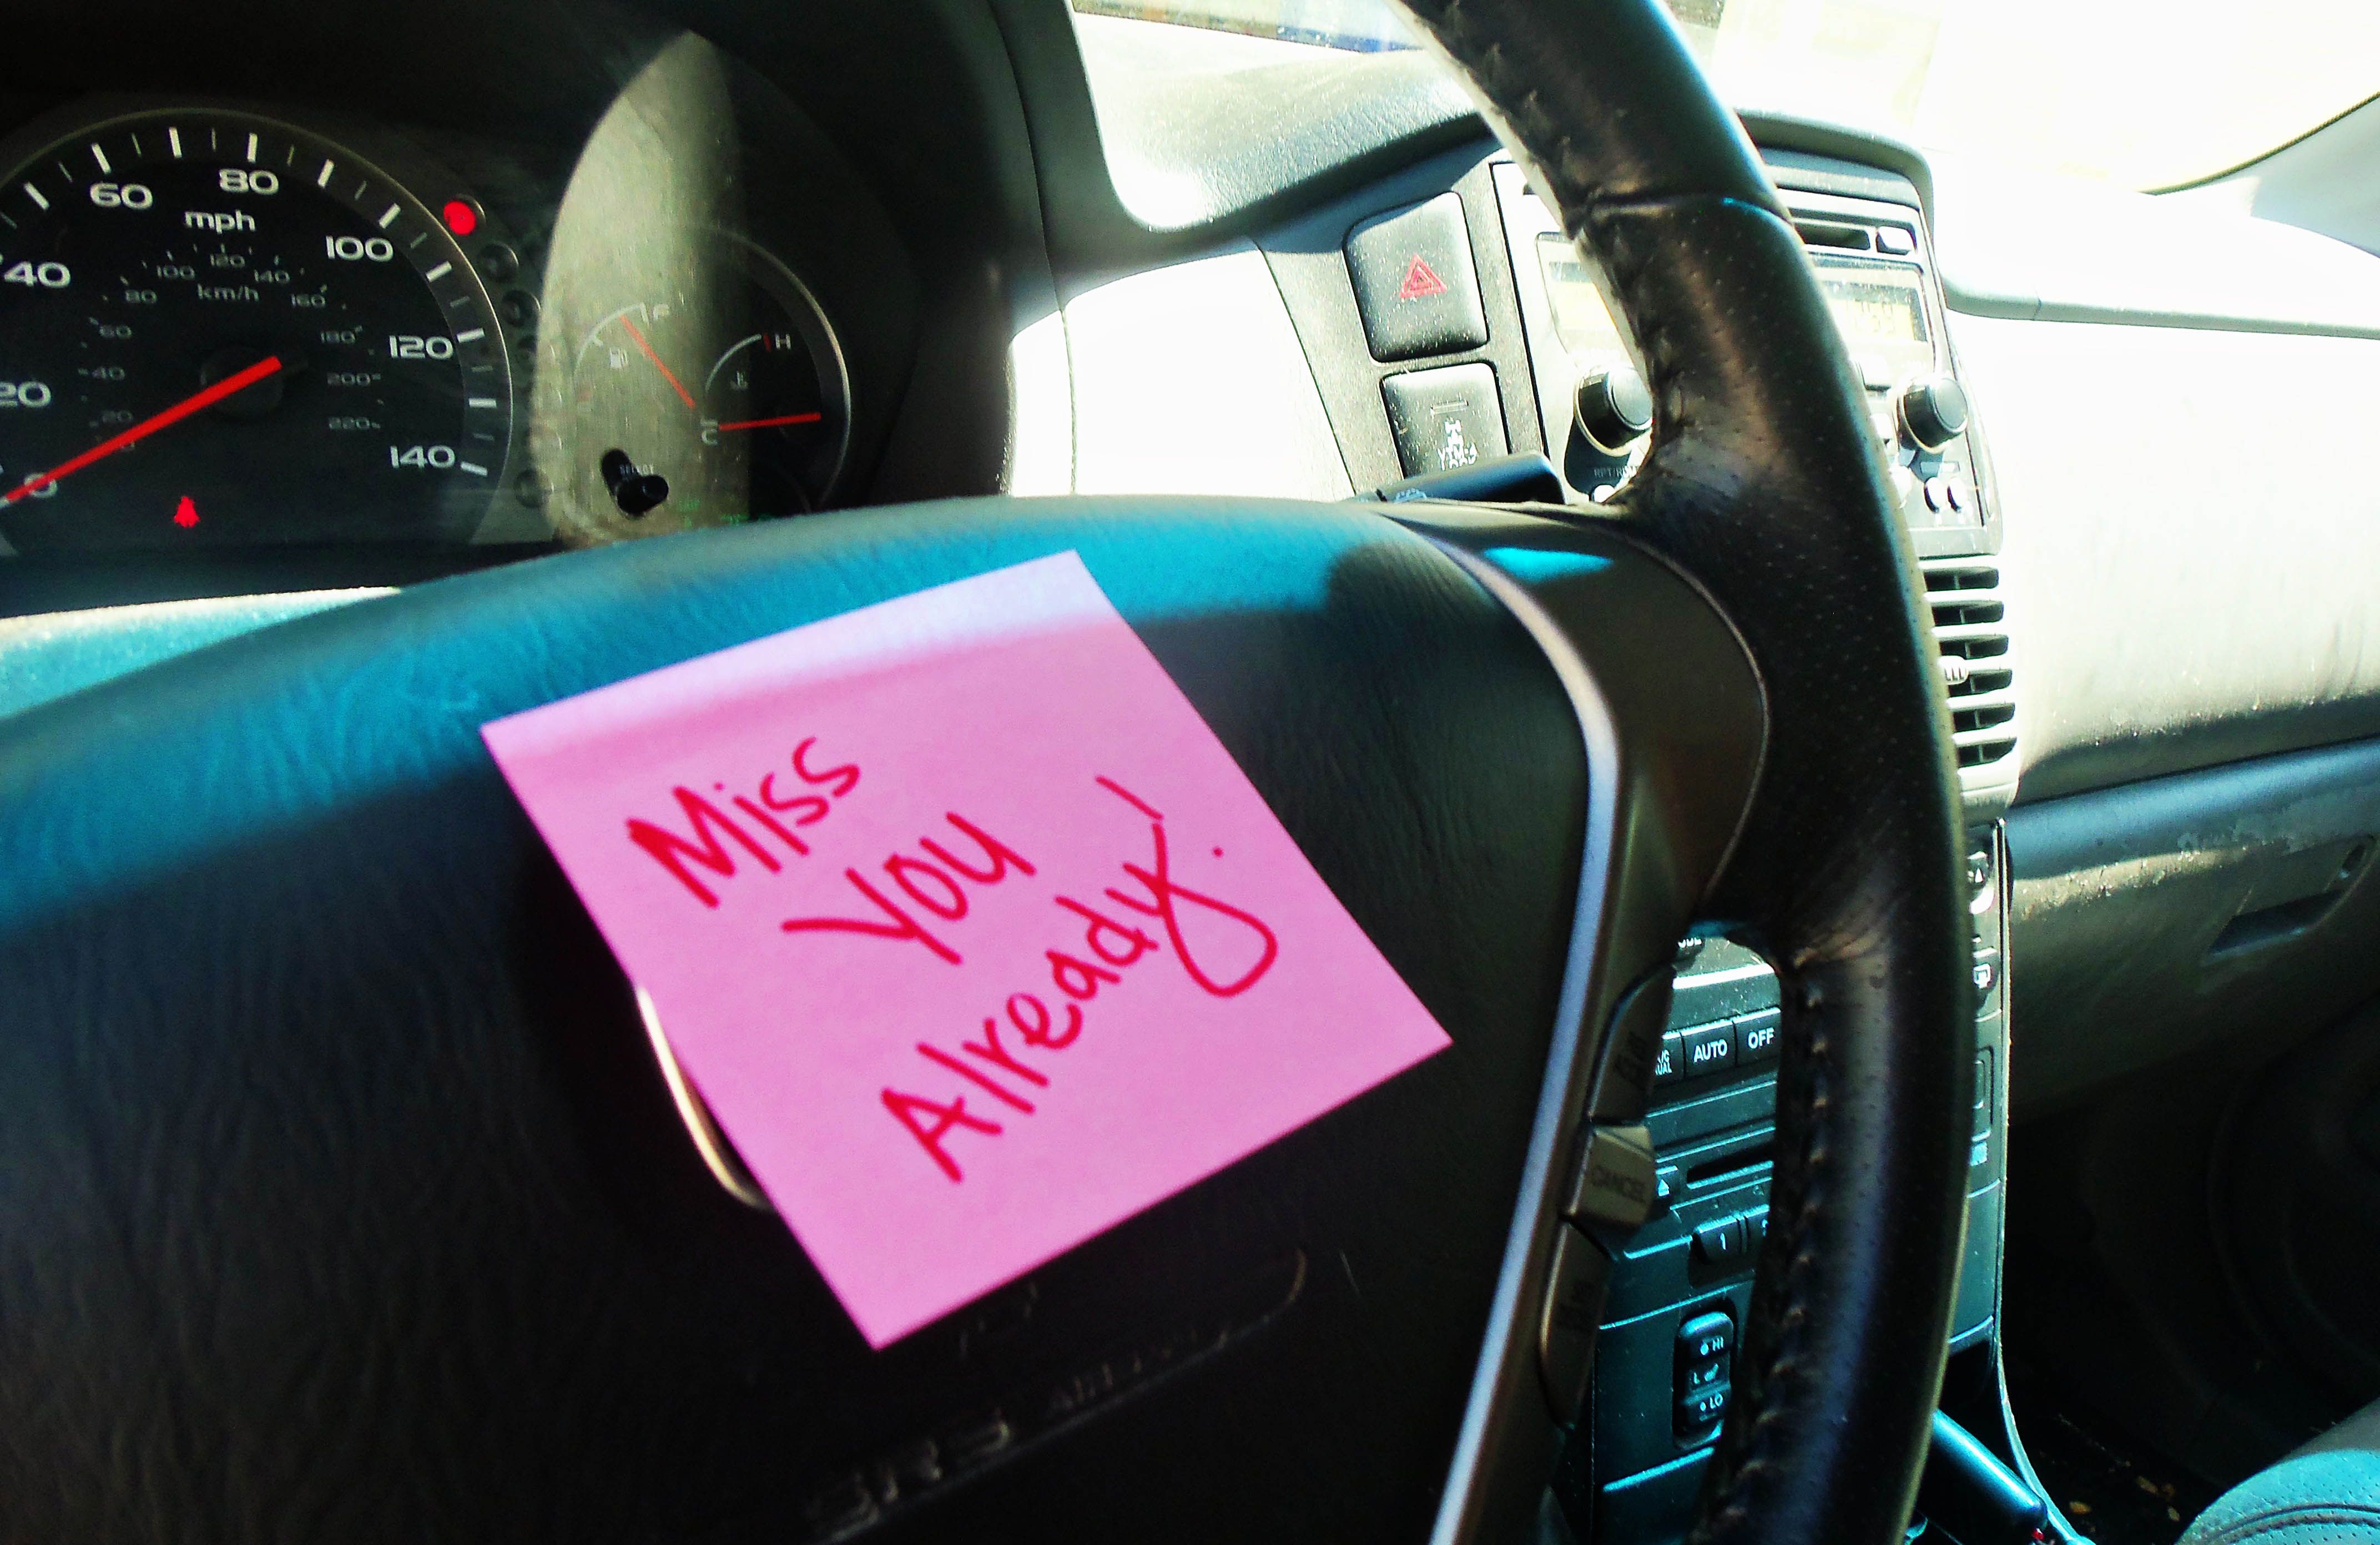 cute notes to leave your boyfriend